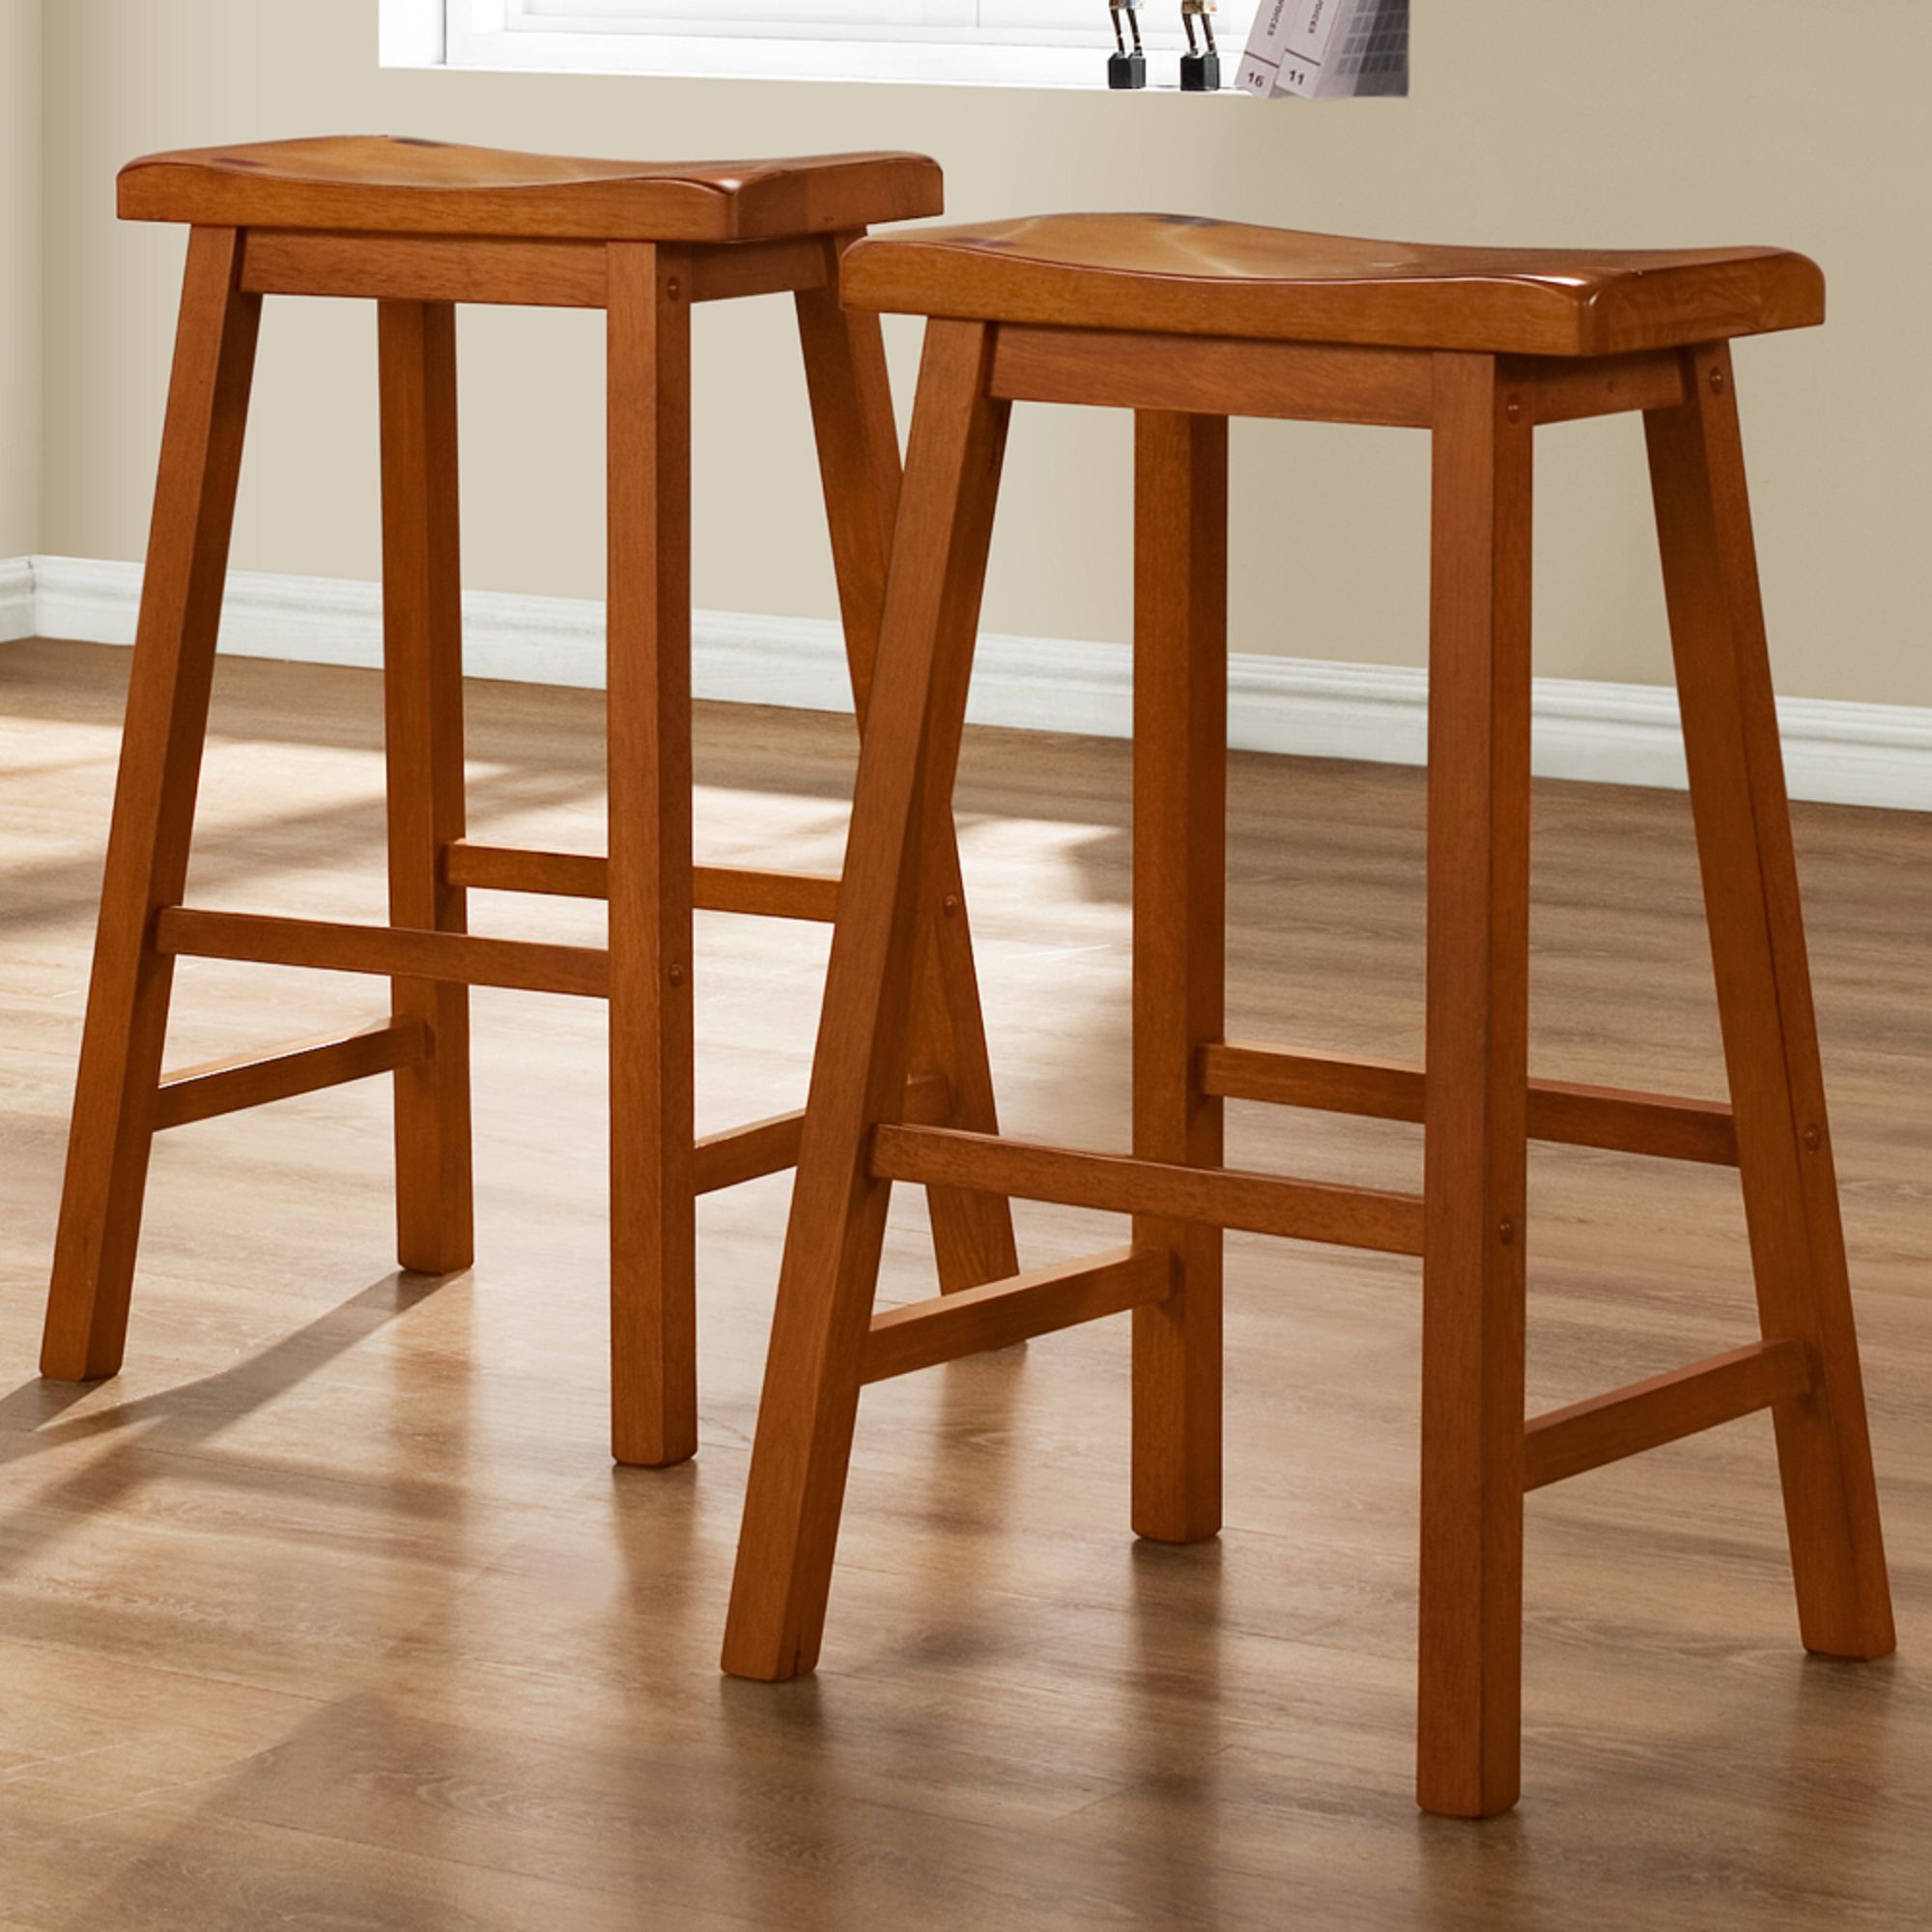 Saddle Seat 29-inch Bar Height Backless Stools (Set of 2)